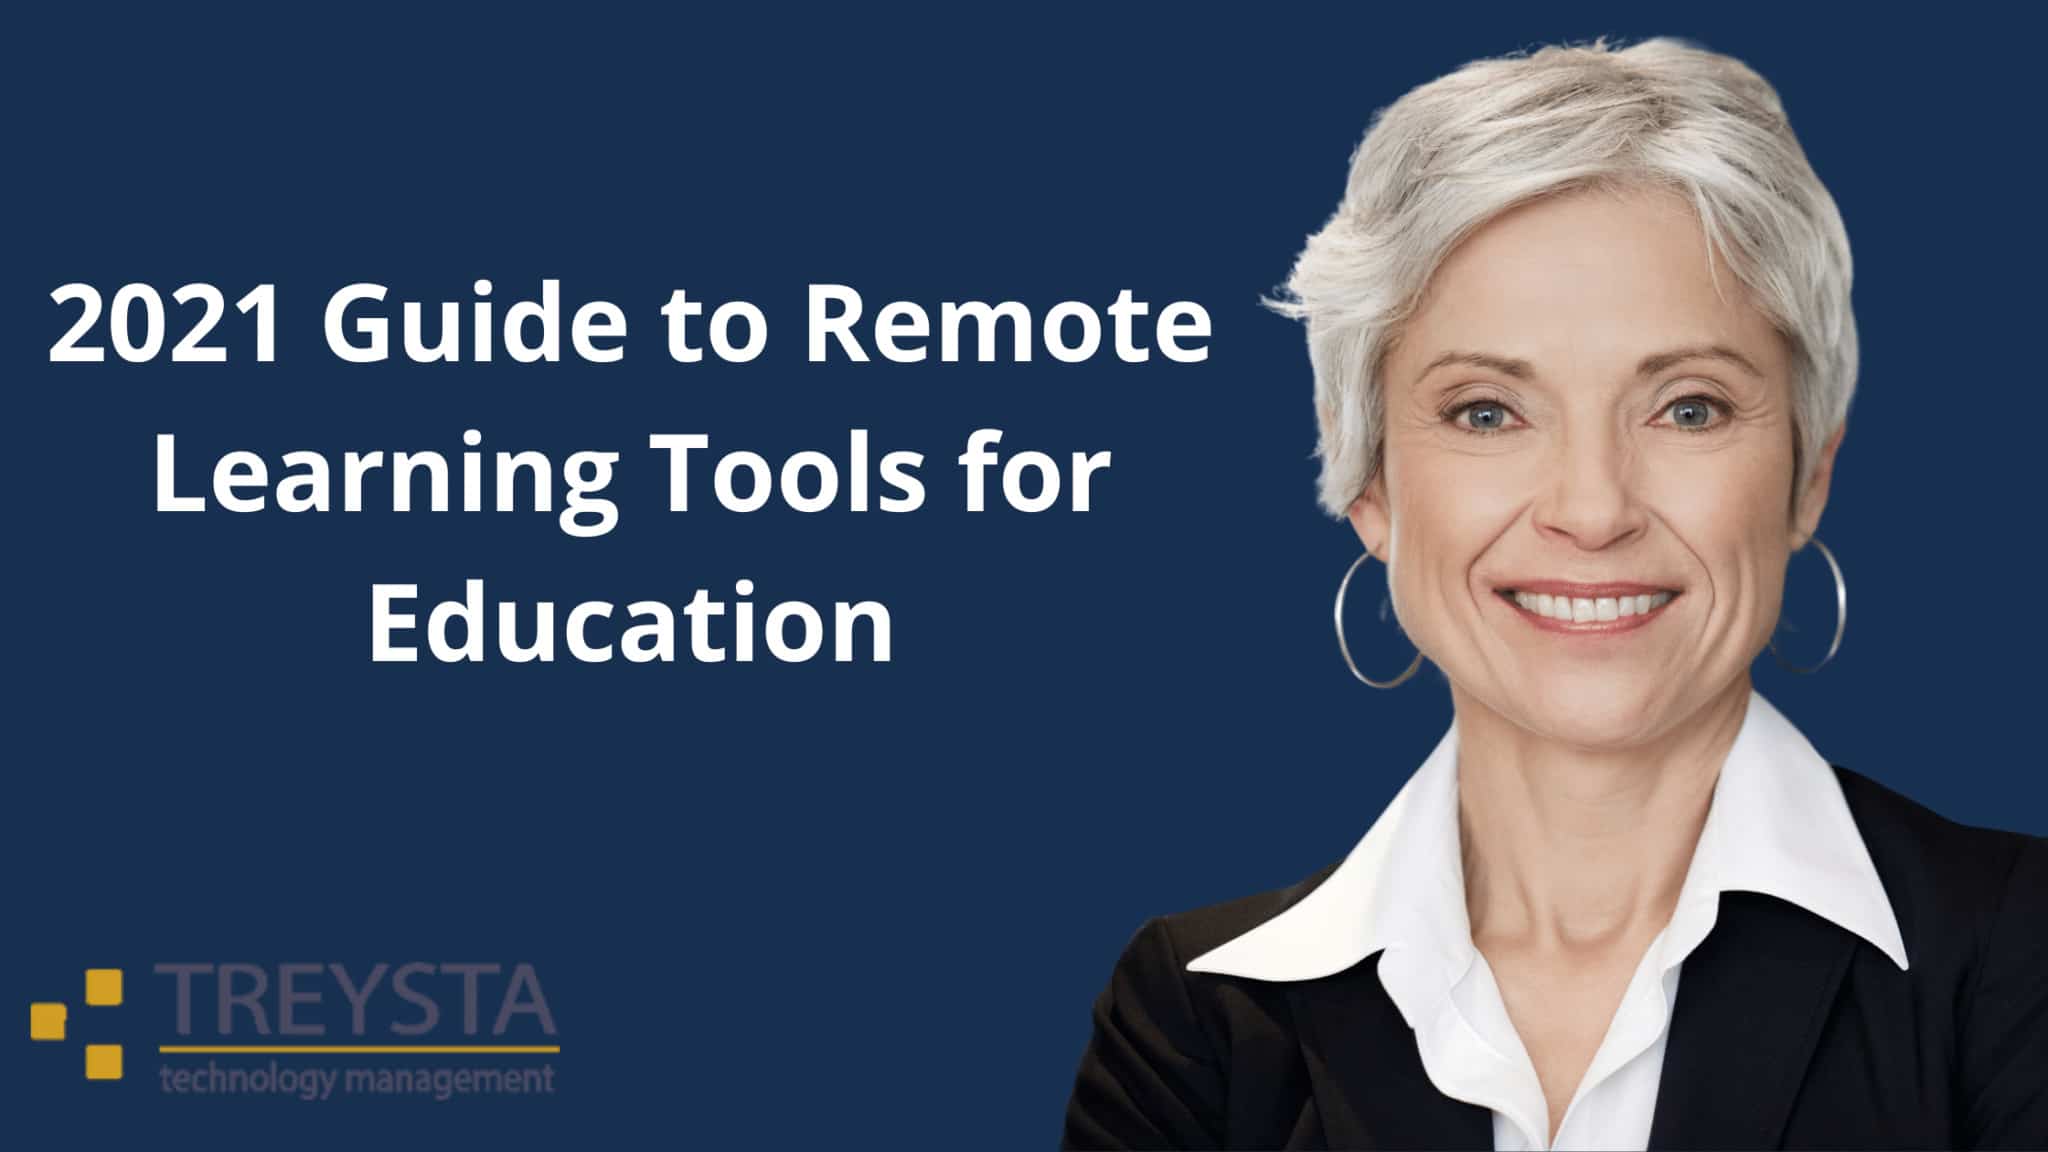 2021 Guide to Remote Learning Tools for Education